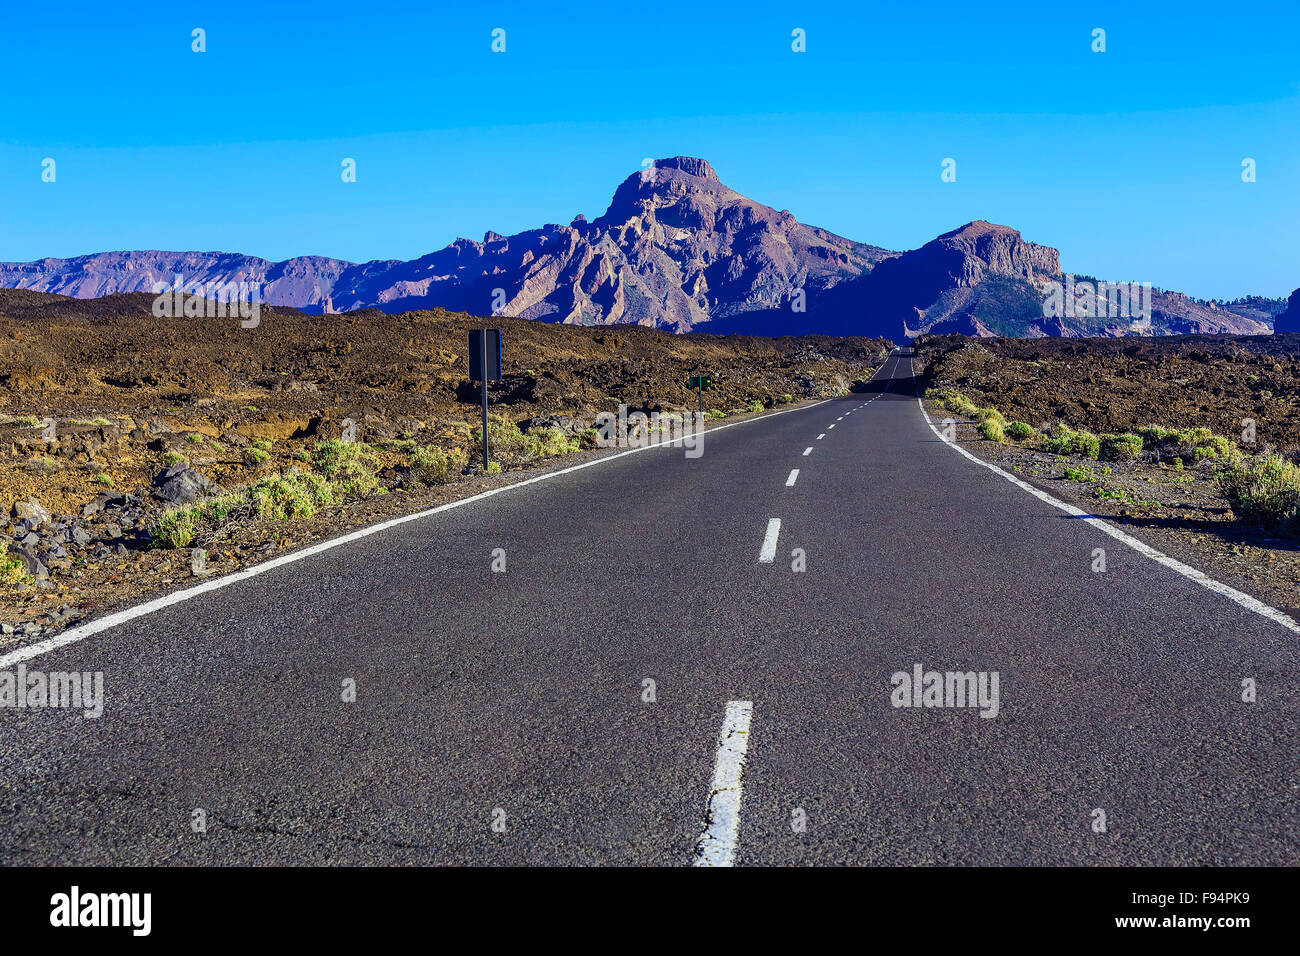 Landscape with Asphalt Road and Mountains on Canary Island Stock Photo